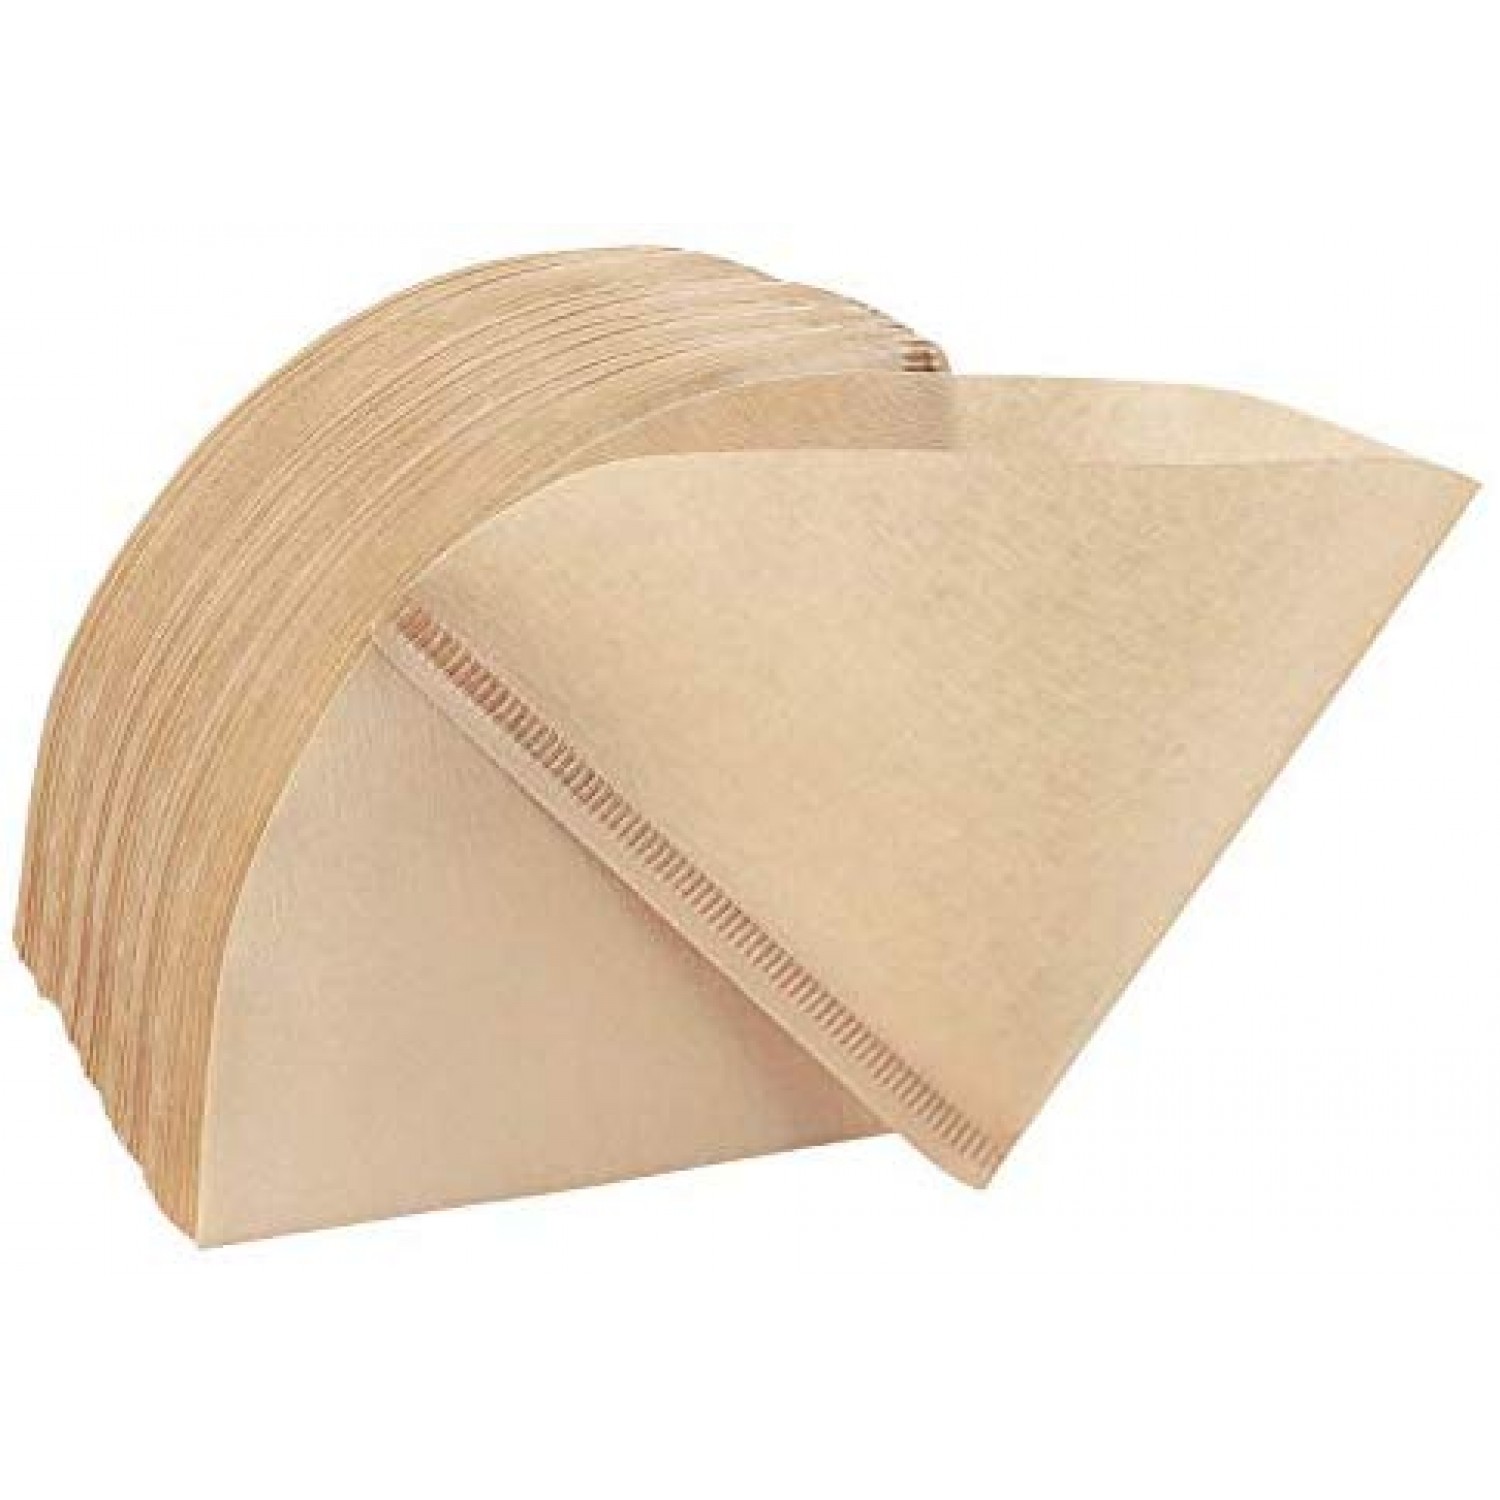 200 Pcs Count 1-4 Cups Natural Coffee Filters Unbleached Paper Model 1 Cone Coffee Filters Compatible with V60 and All No.1 Size Pour Over Drippers 